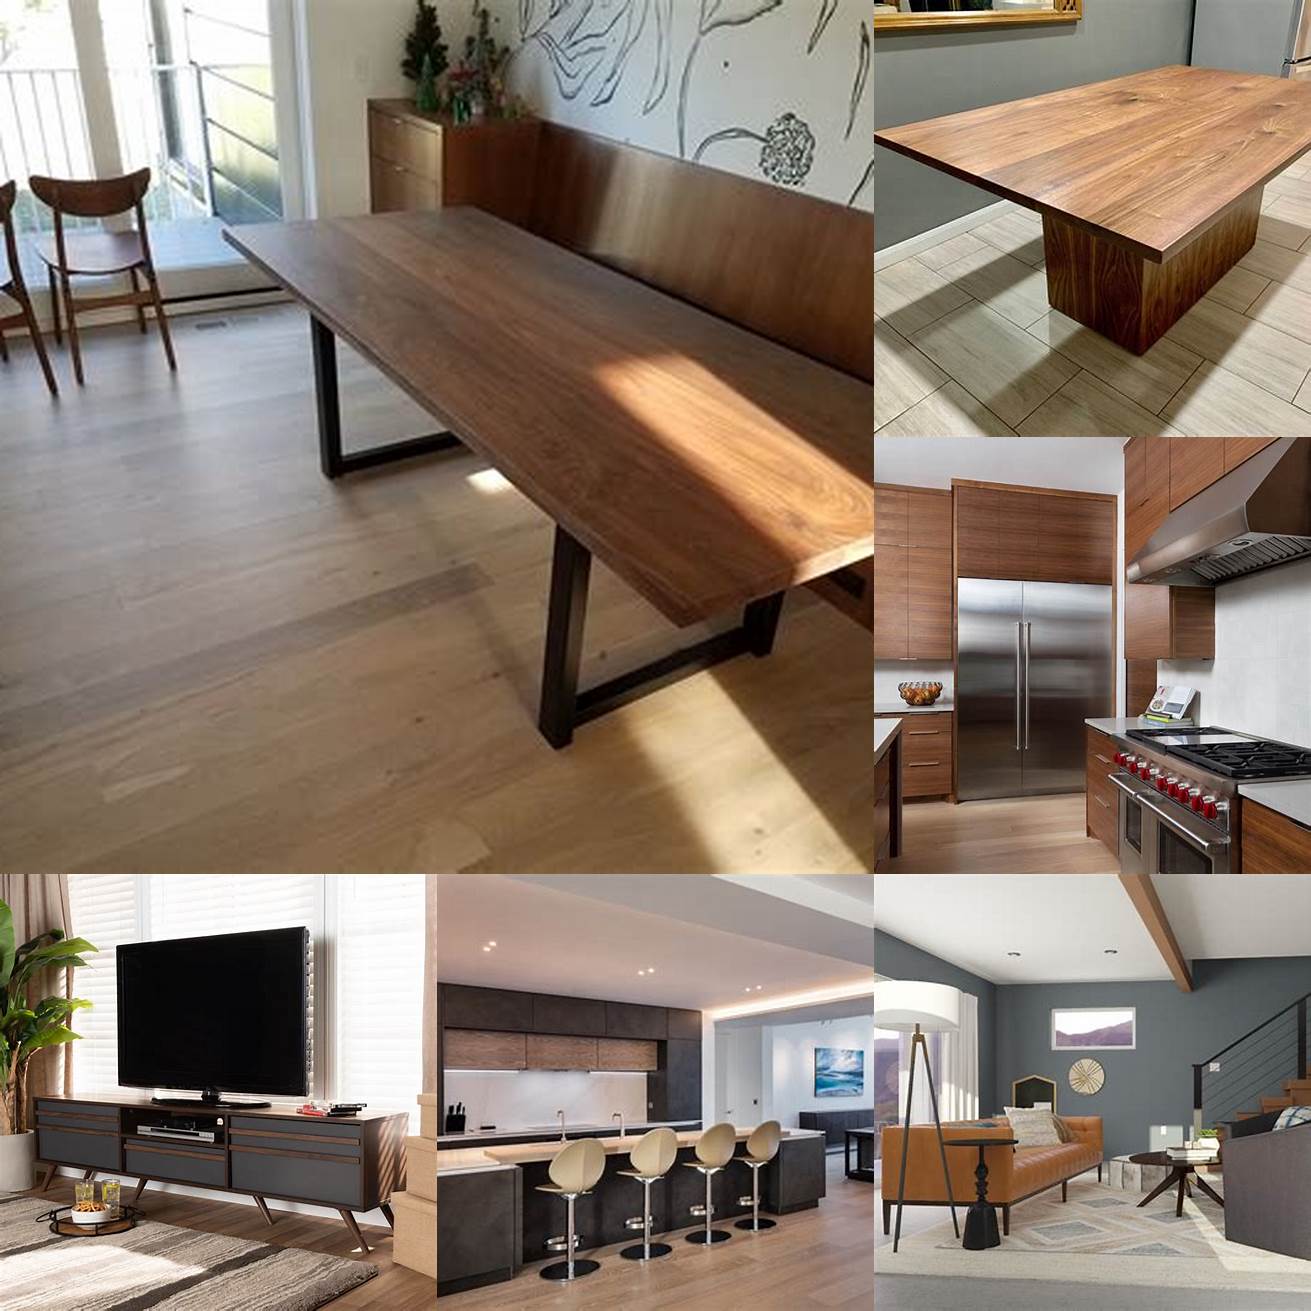 3 In a modern setting Walnut furniture can be paired with sleek modern pieces for a more contemporary look